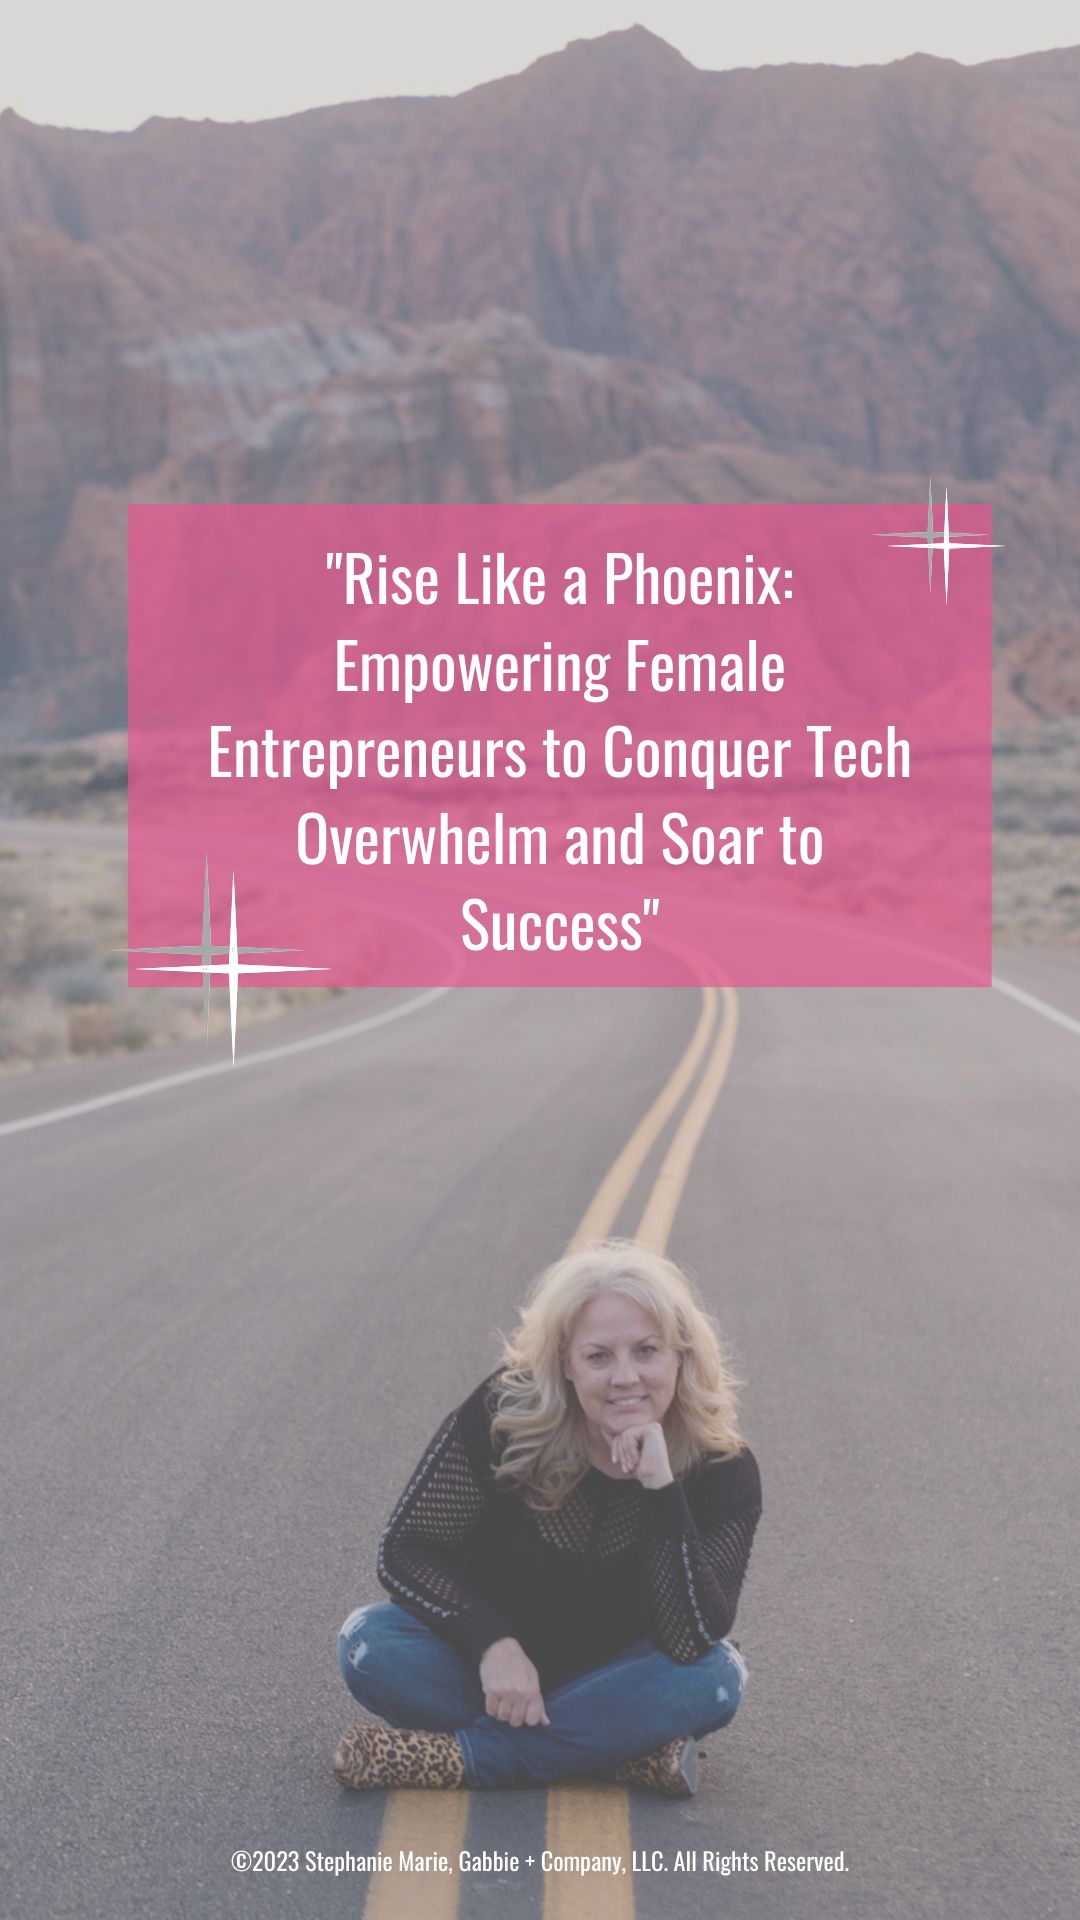 Explore our empowering poem that celebrates female entrepreneurs, encouraging them to rise like a Phoenix and conquer tech overwhelm as they grow and refine their businesses with a mindful and intentional approach.